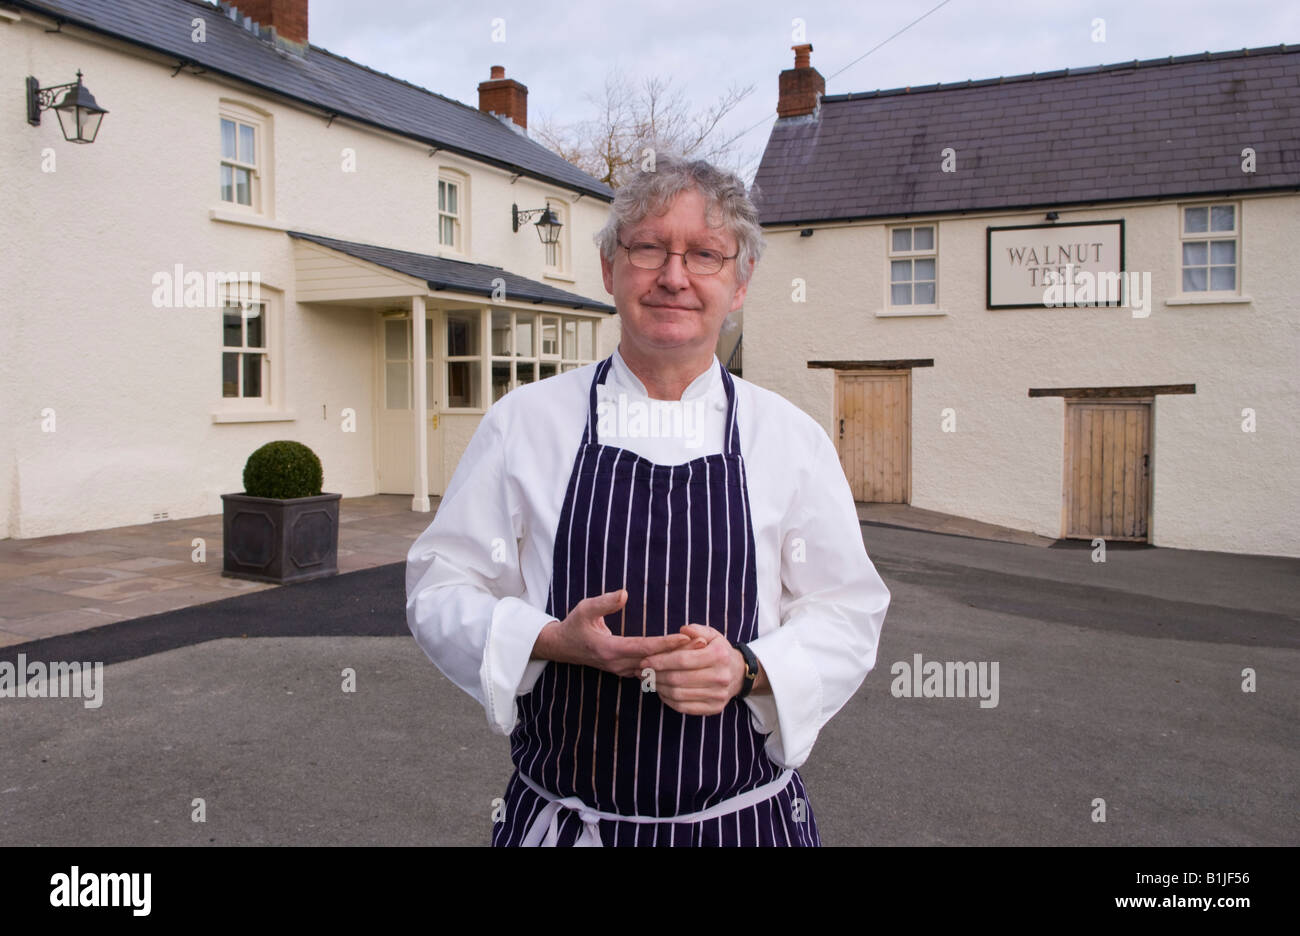 Shaun Hill chef and joint owner of The Walnut Tree Restaurant Llanddewi Skirrid Abergavenny Monmouthshire South Wales UK EU Stock Photo